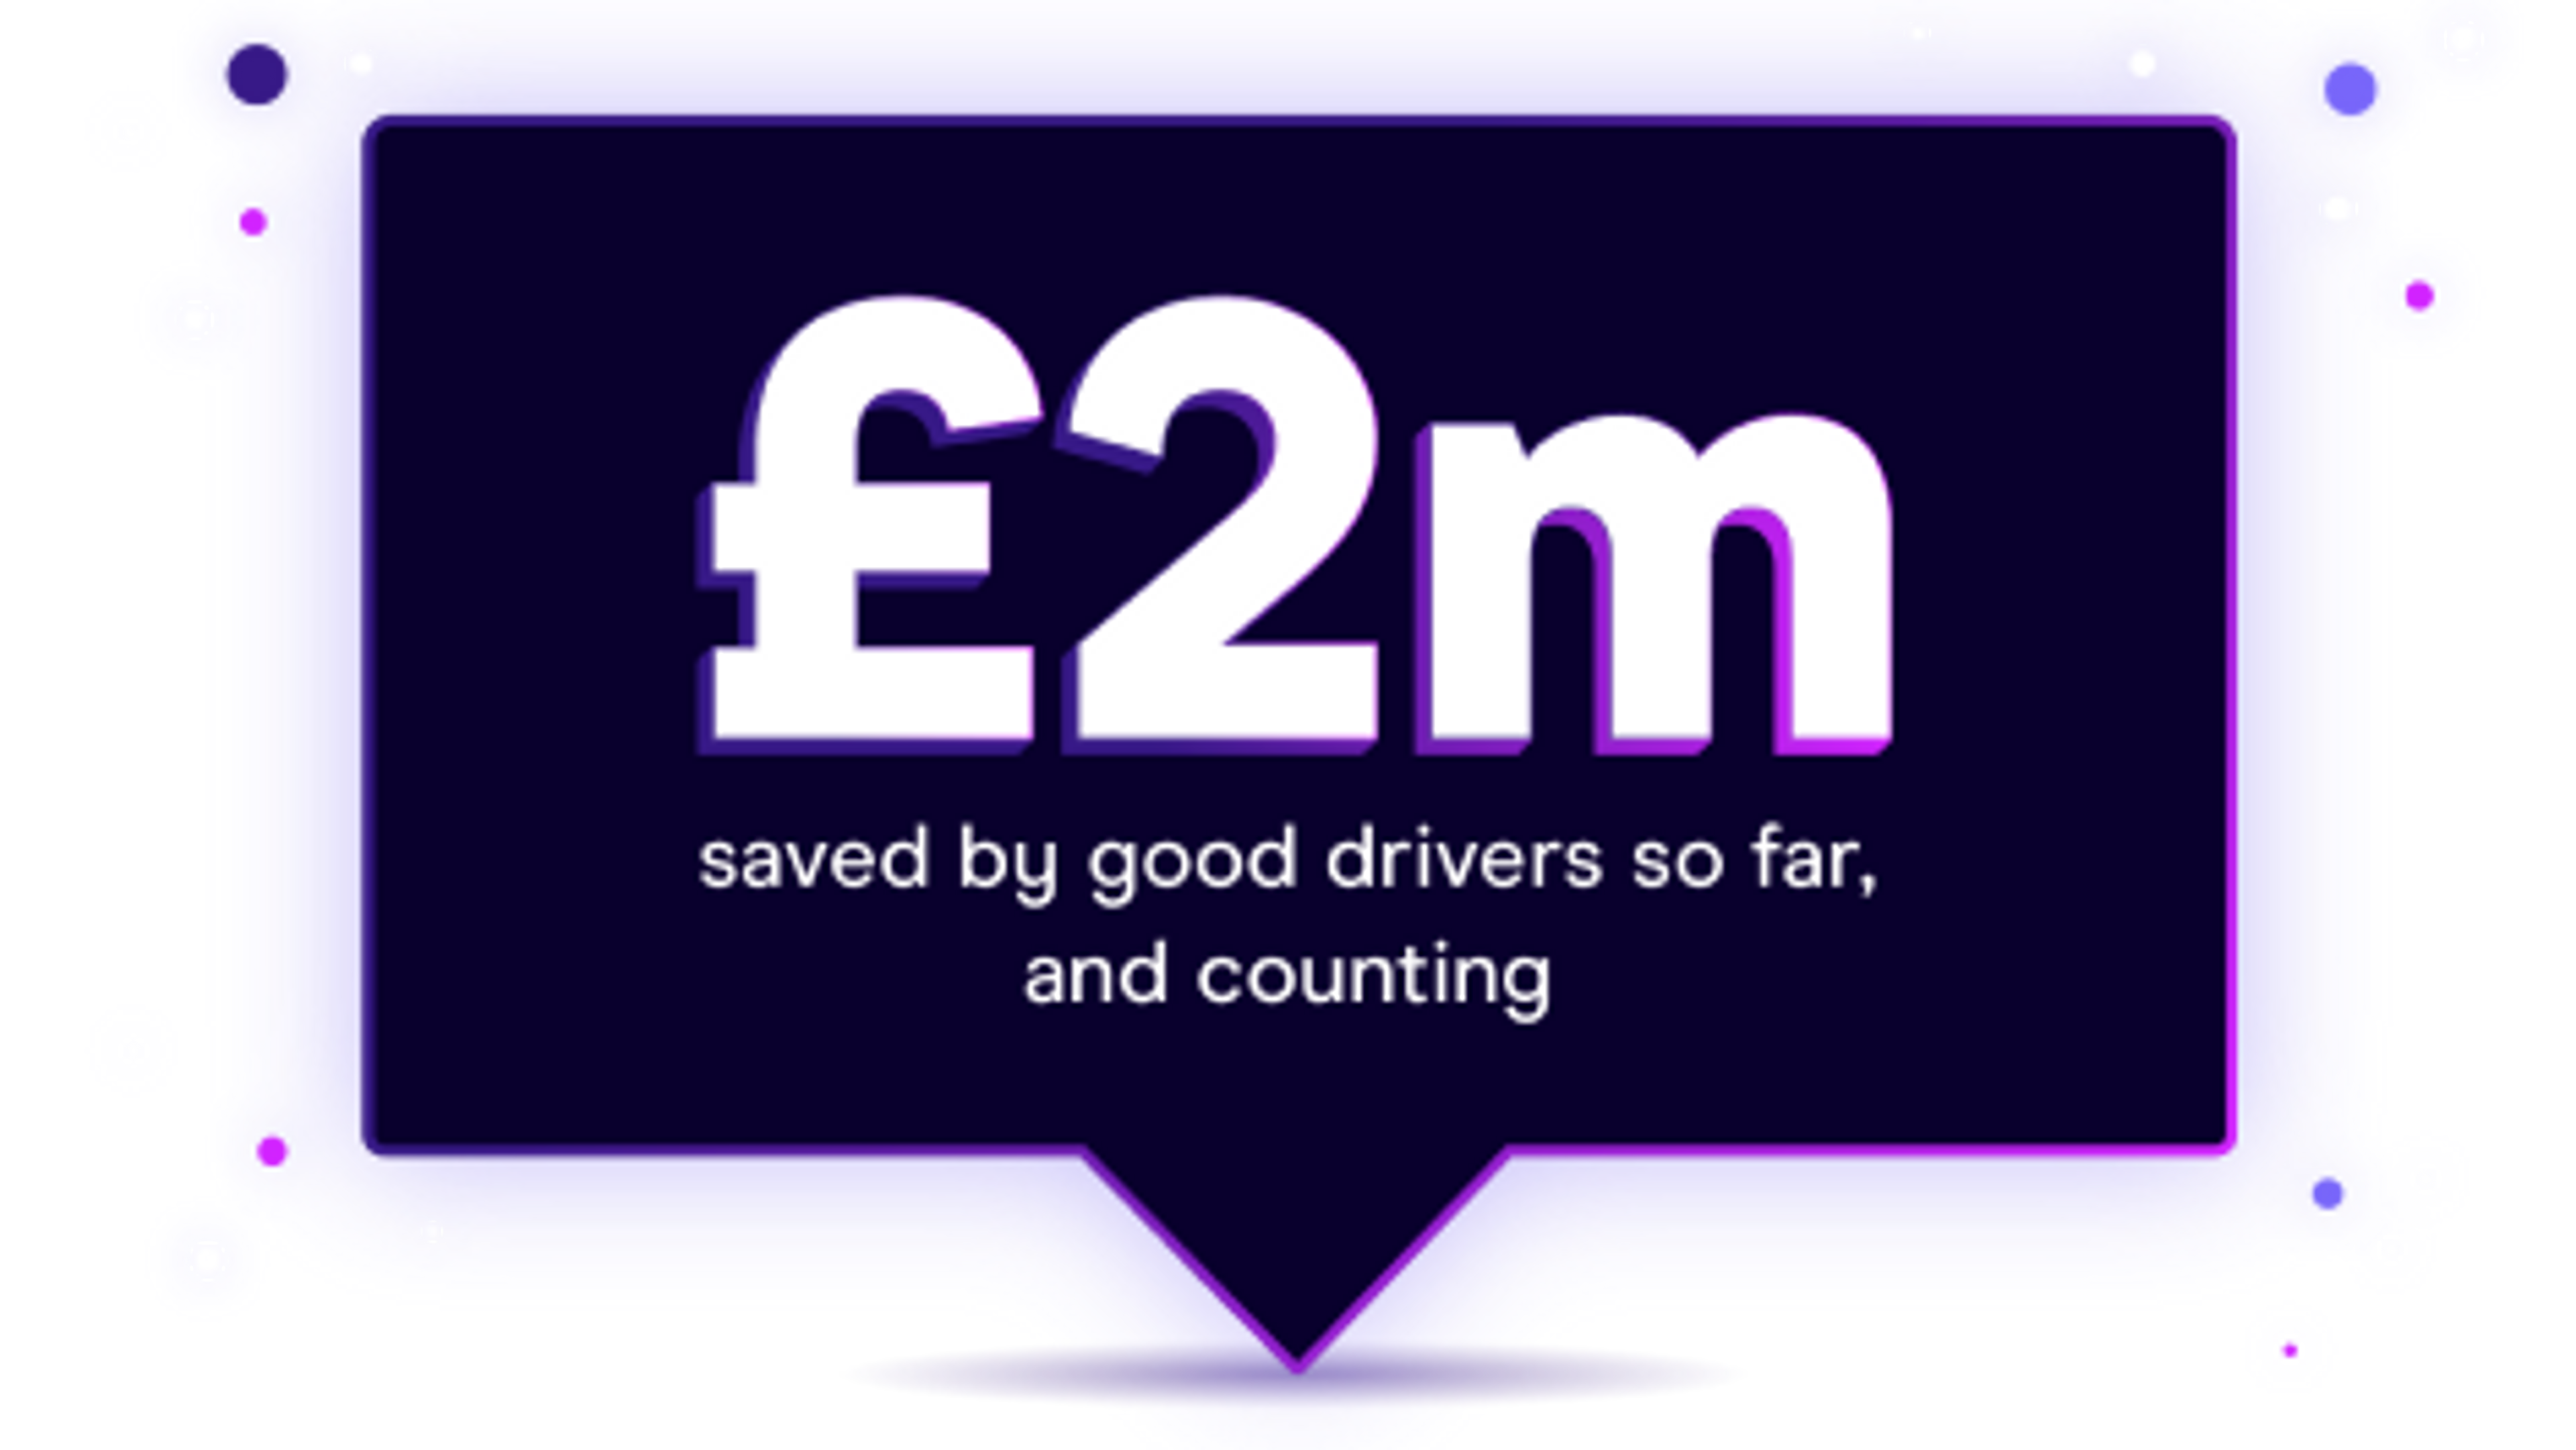 Image with text showing how much Zego has saved customers